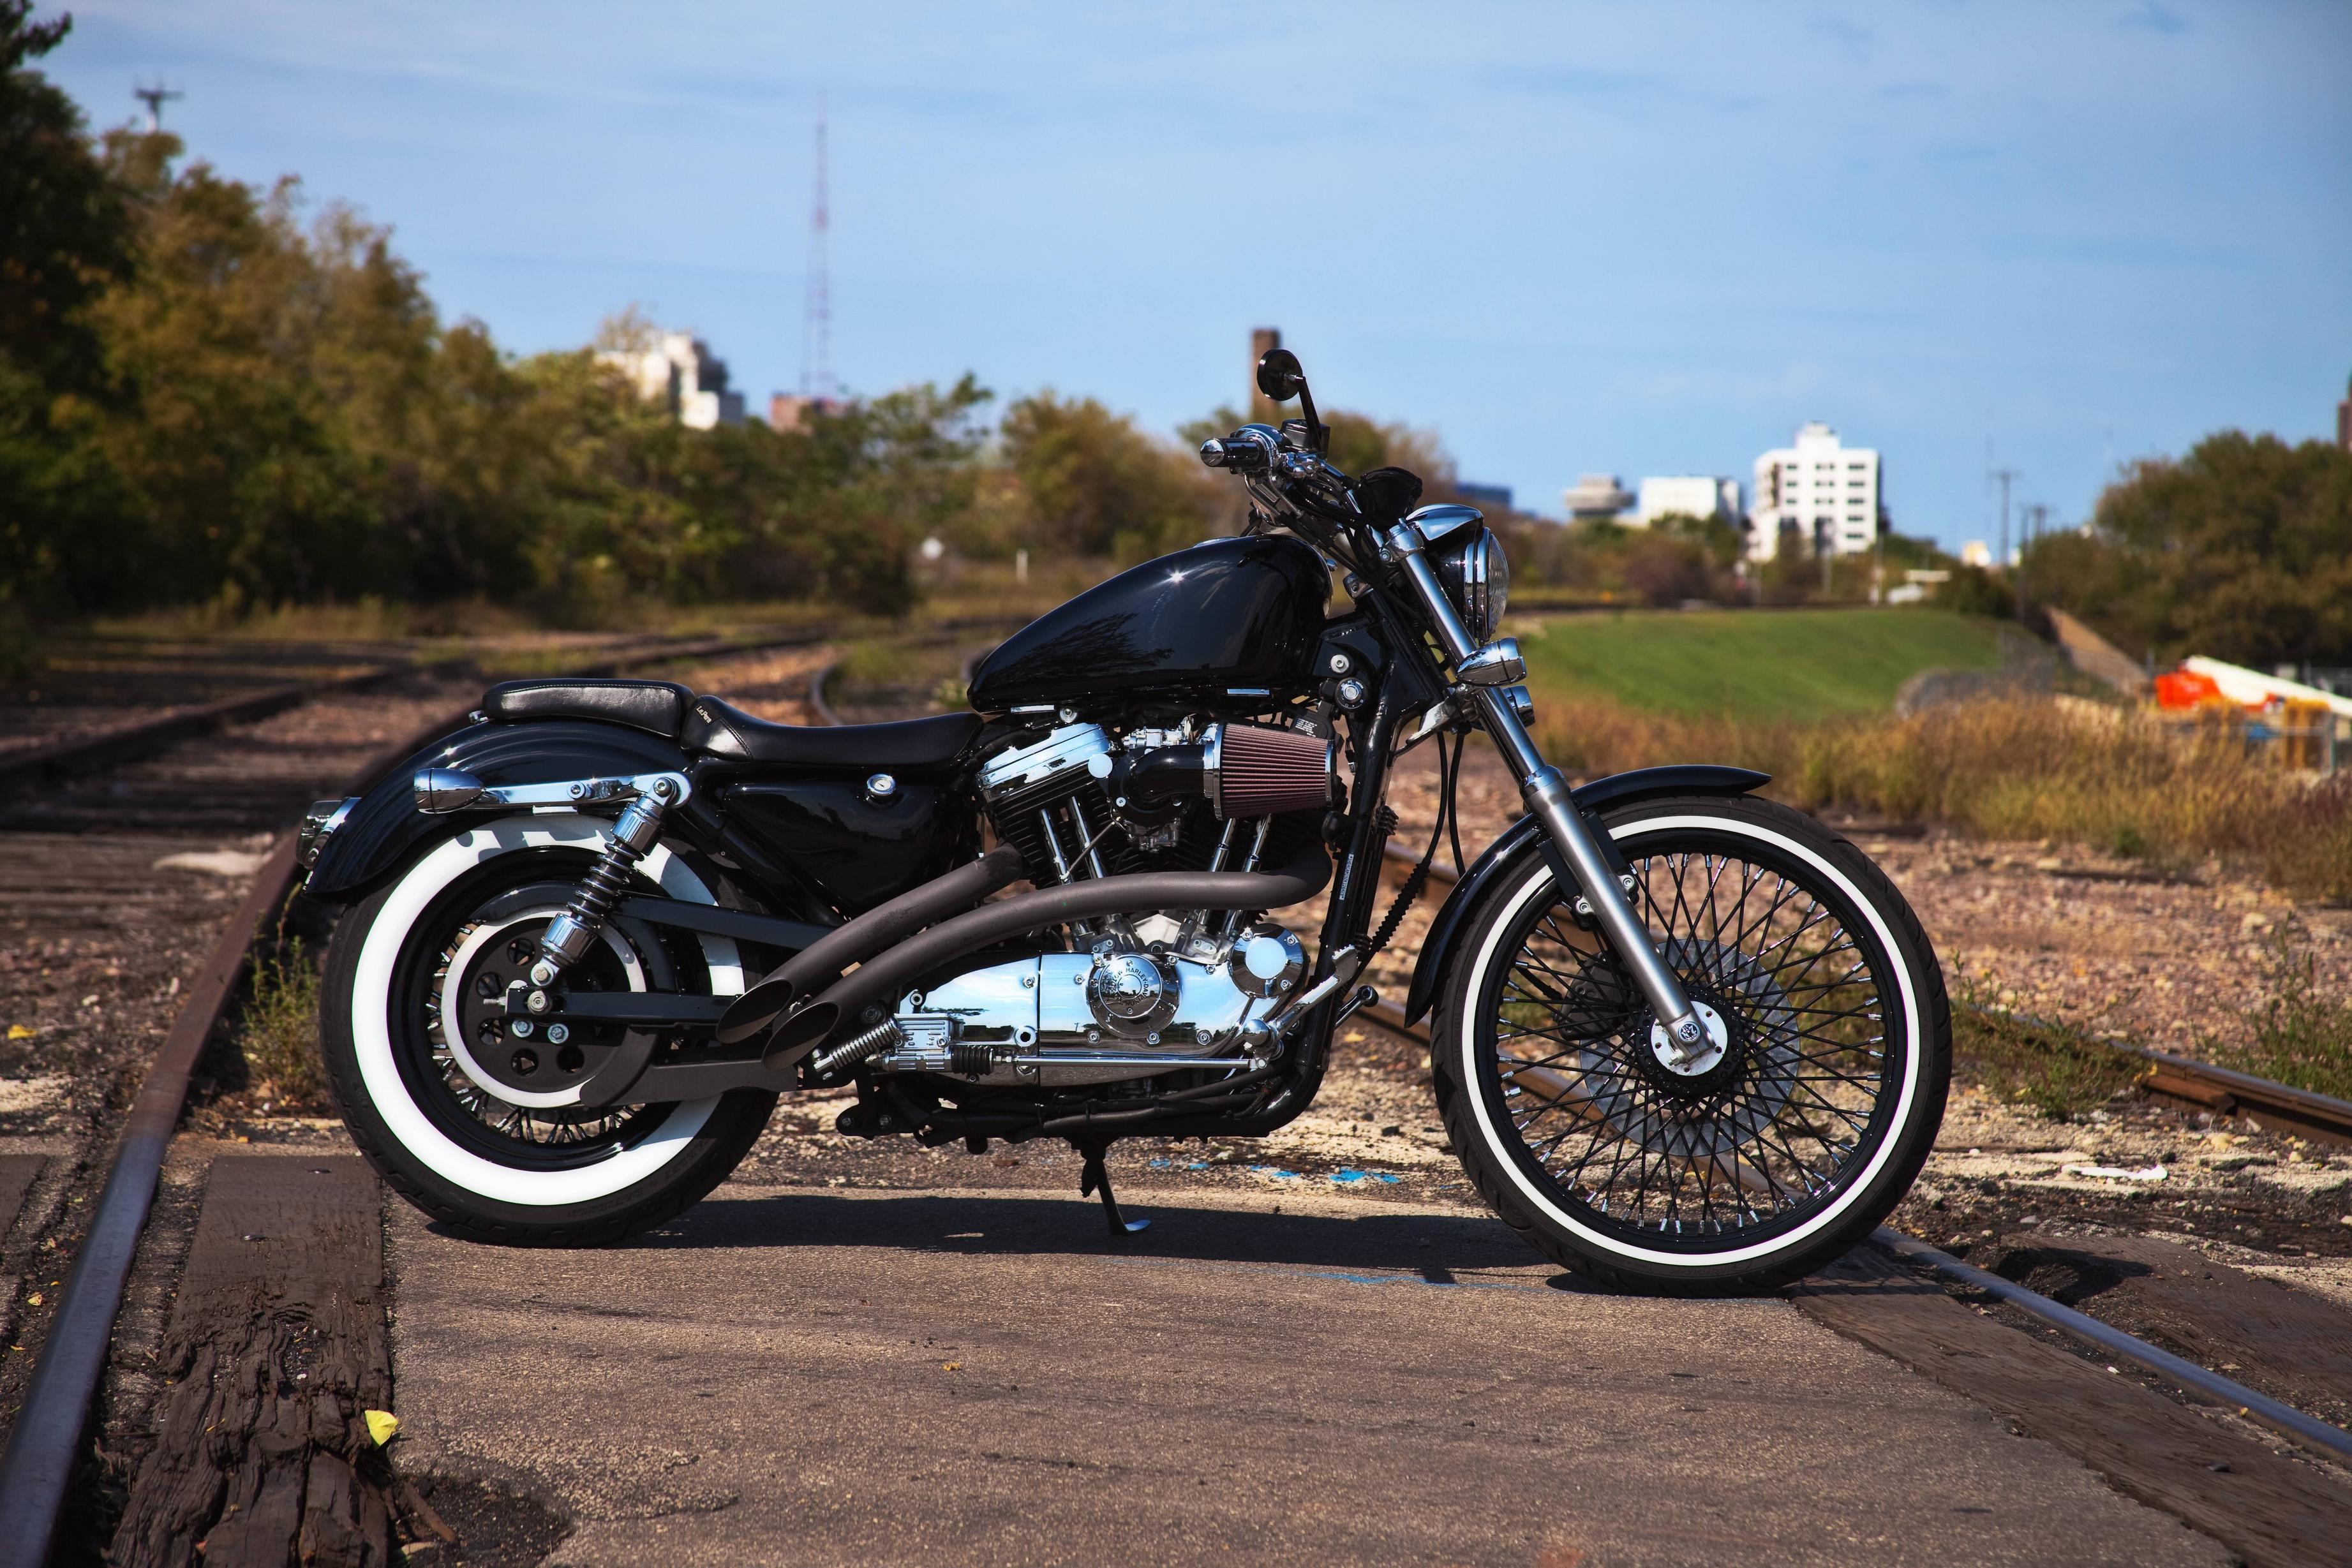 Harley Davidson Sportster 5 Photo, Image, Picture and wallpaper